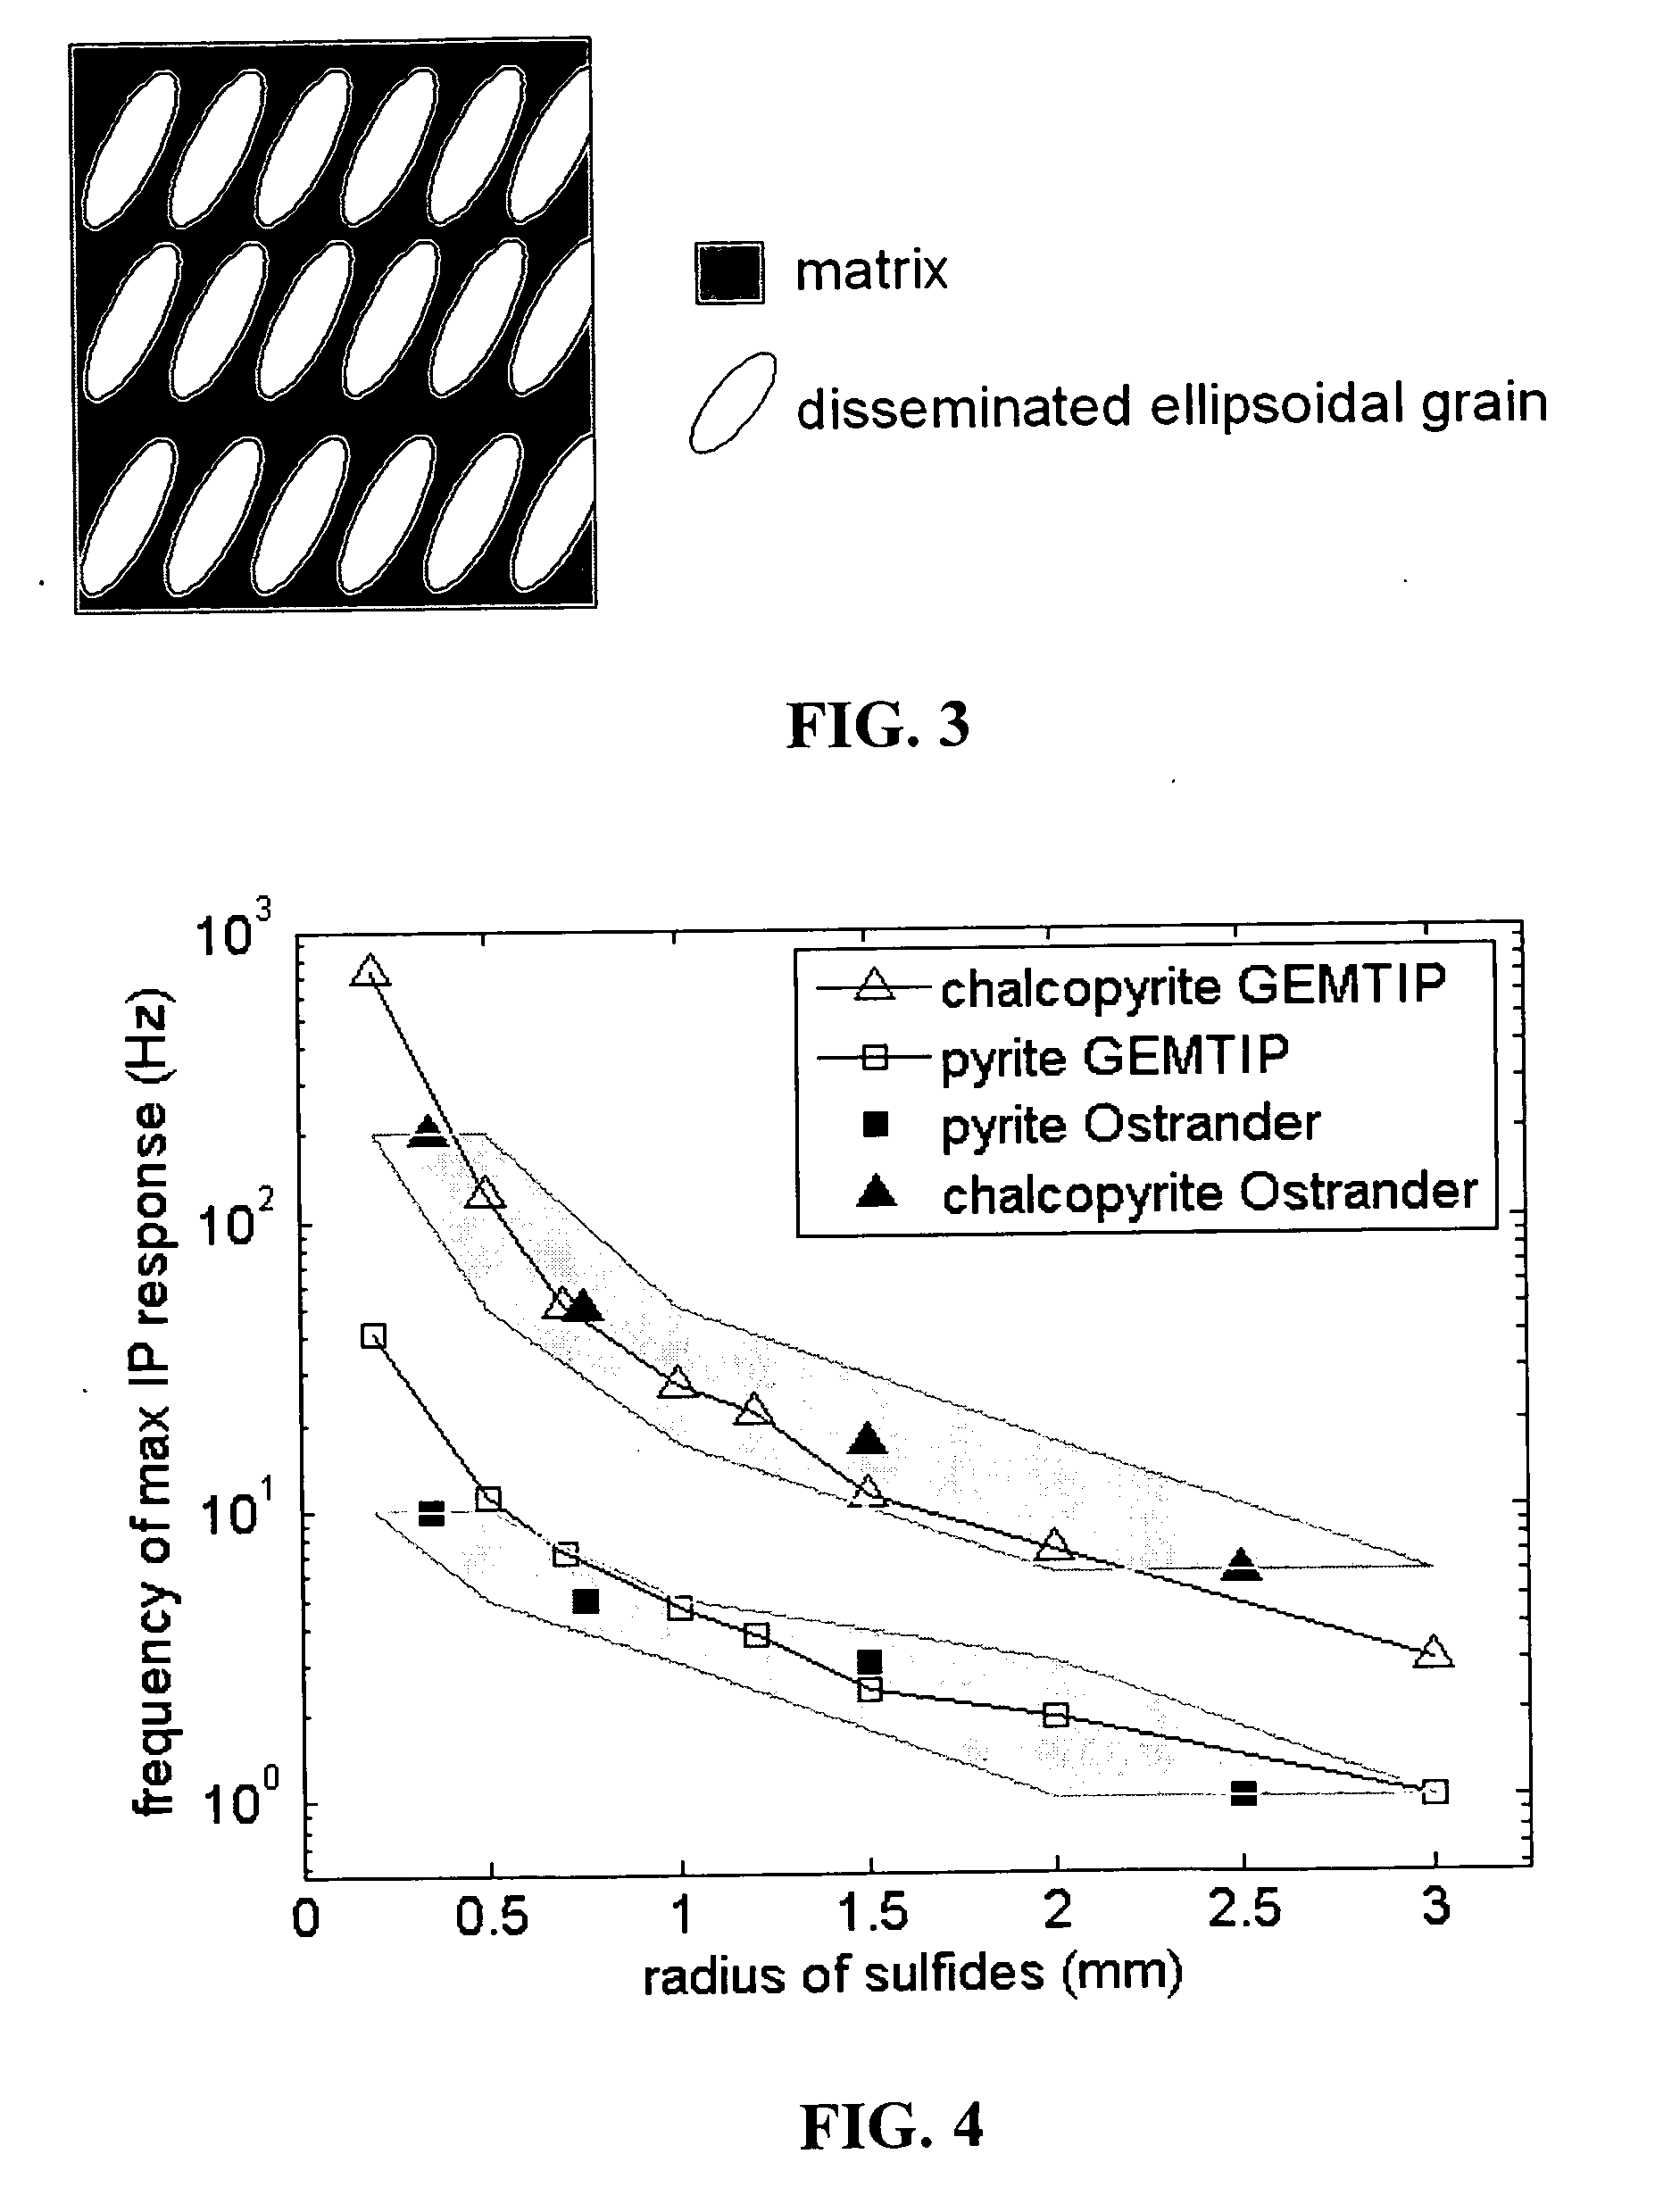 Geophysical technique for mineral exploration and discrimination based on electromagnetic methods and associated systems